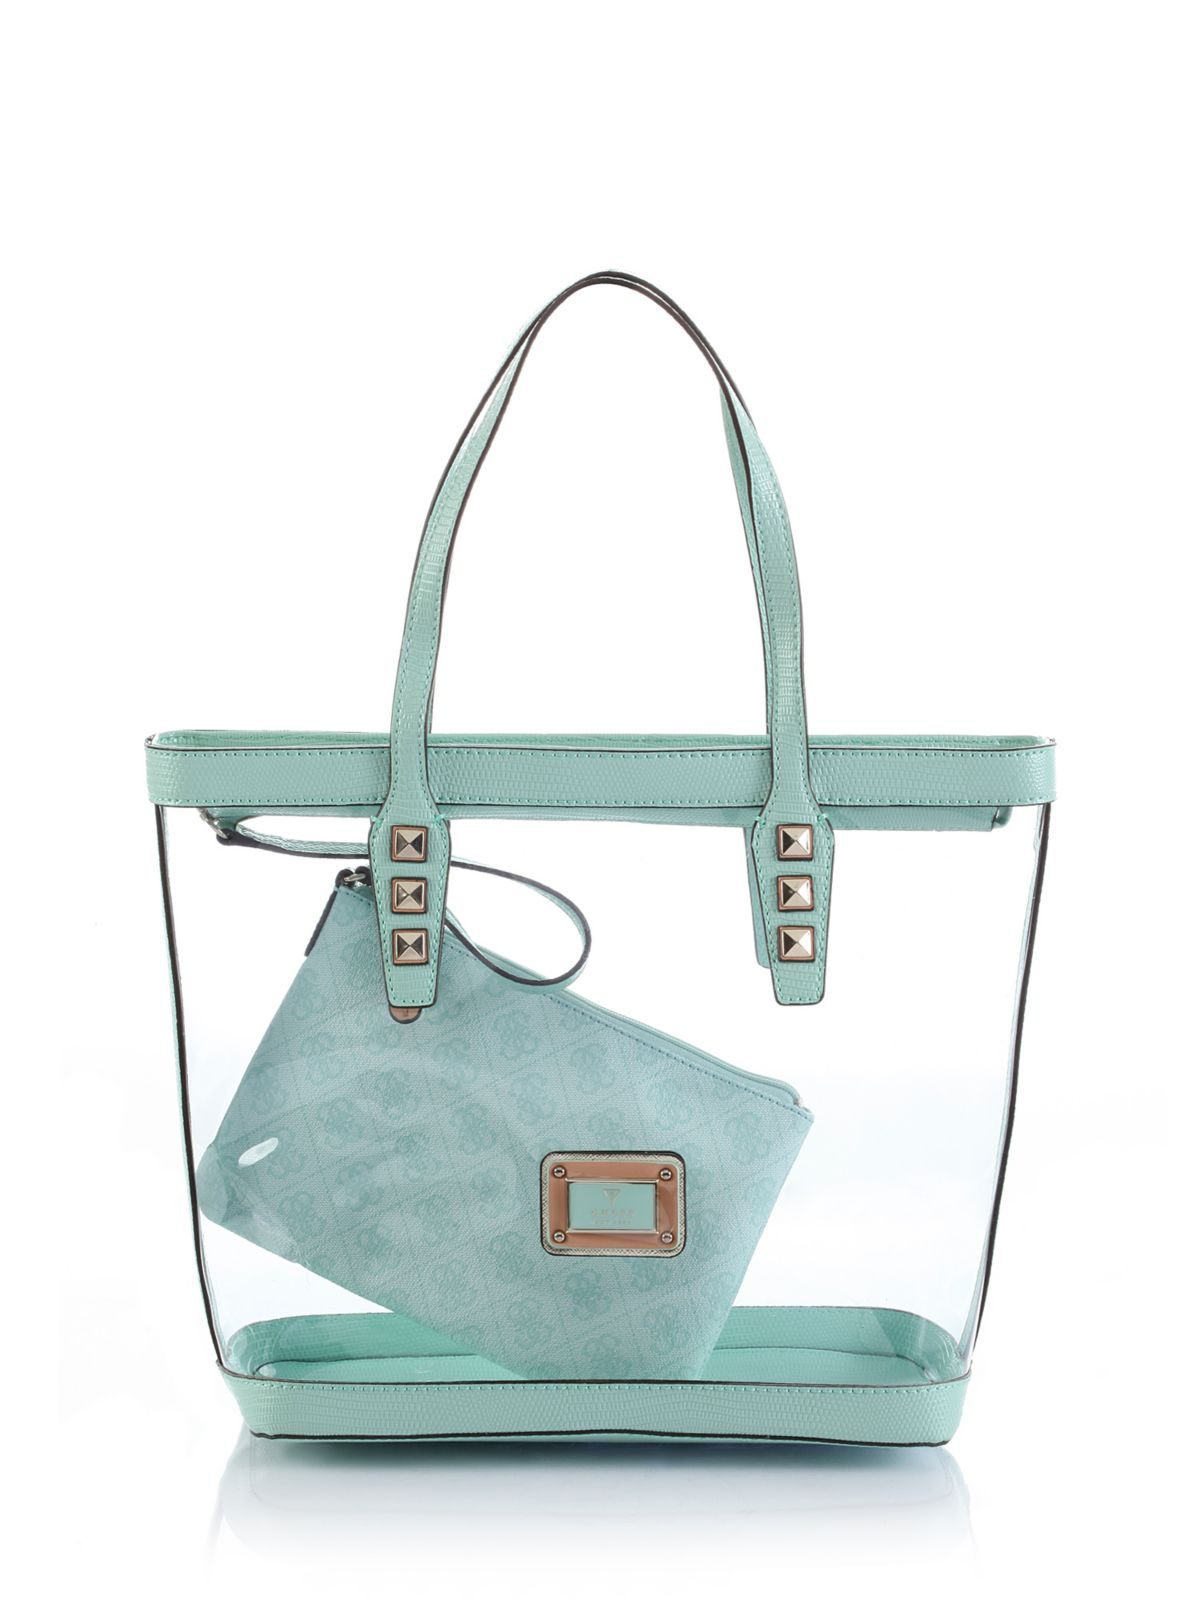 Guess Logo Remix Clear Plastic Tote Bag in Green (mint) | Lyst